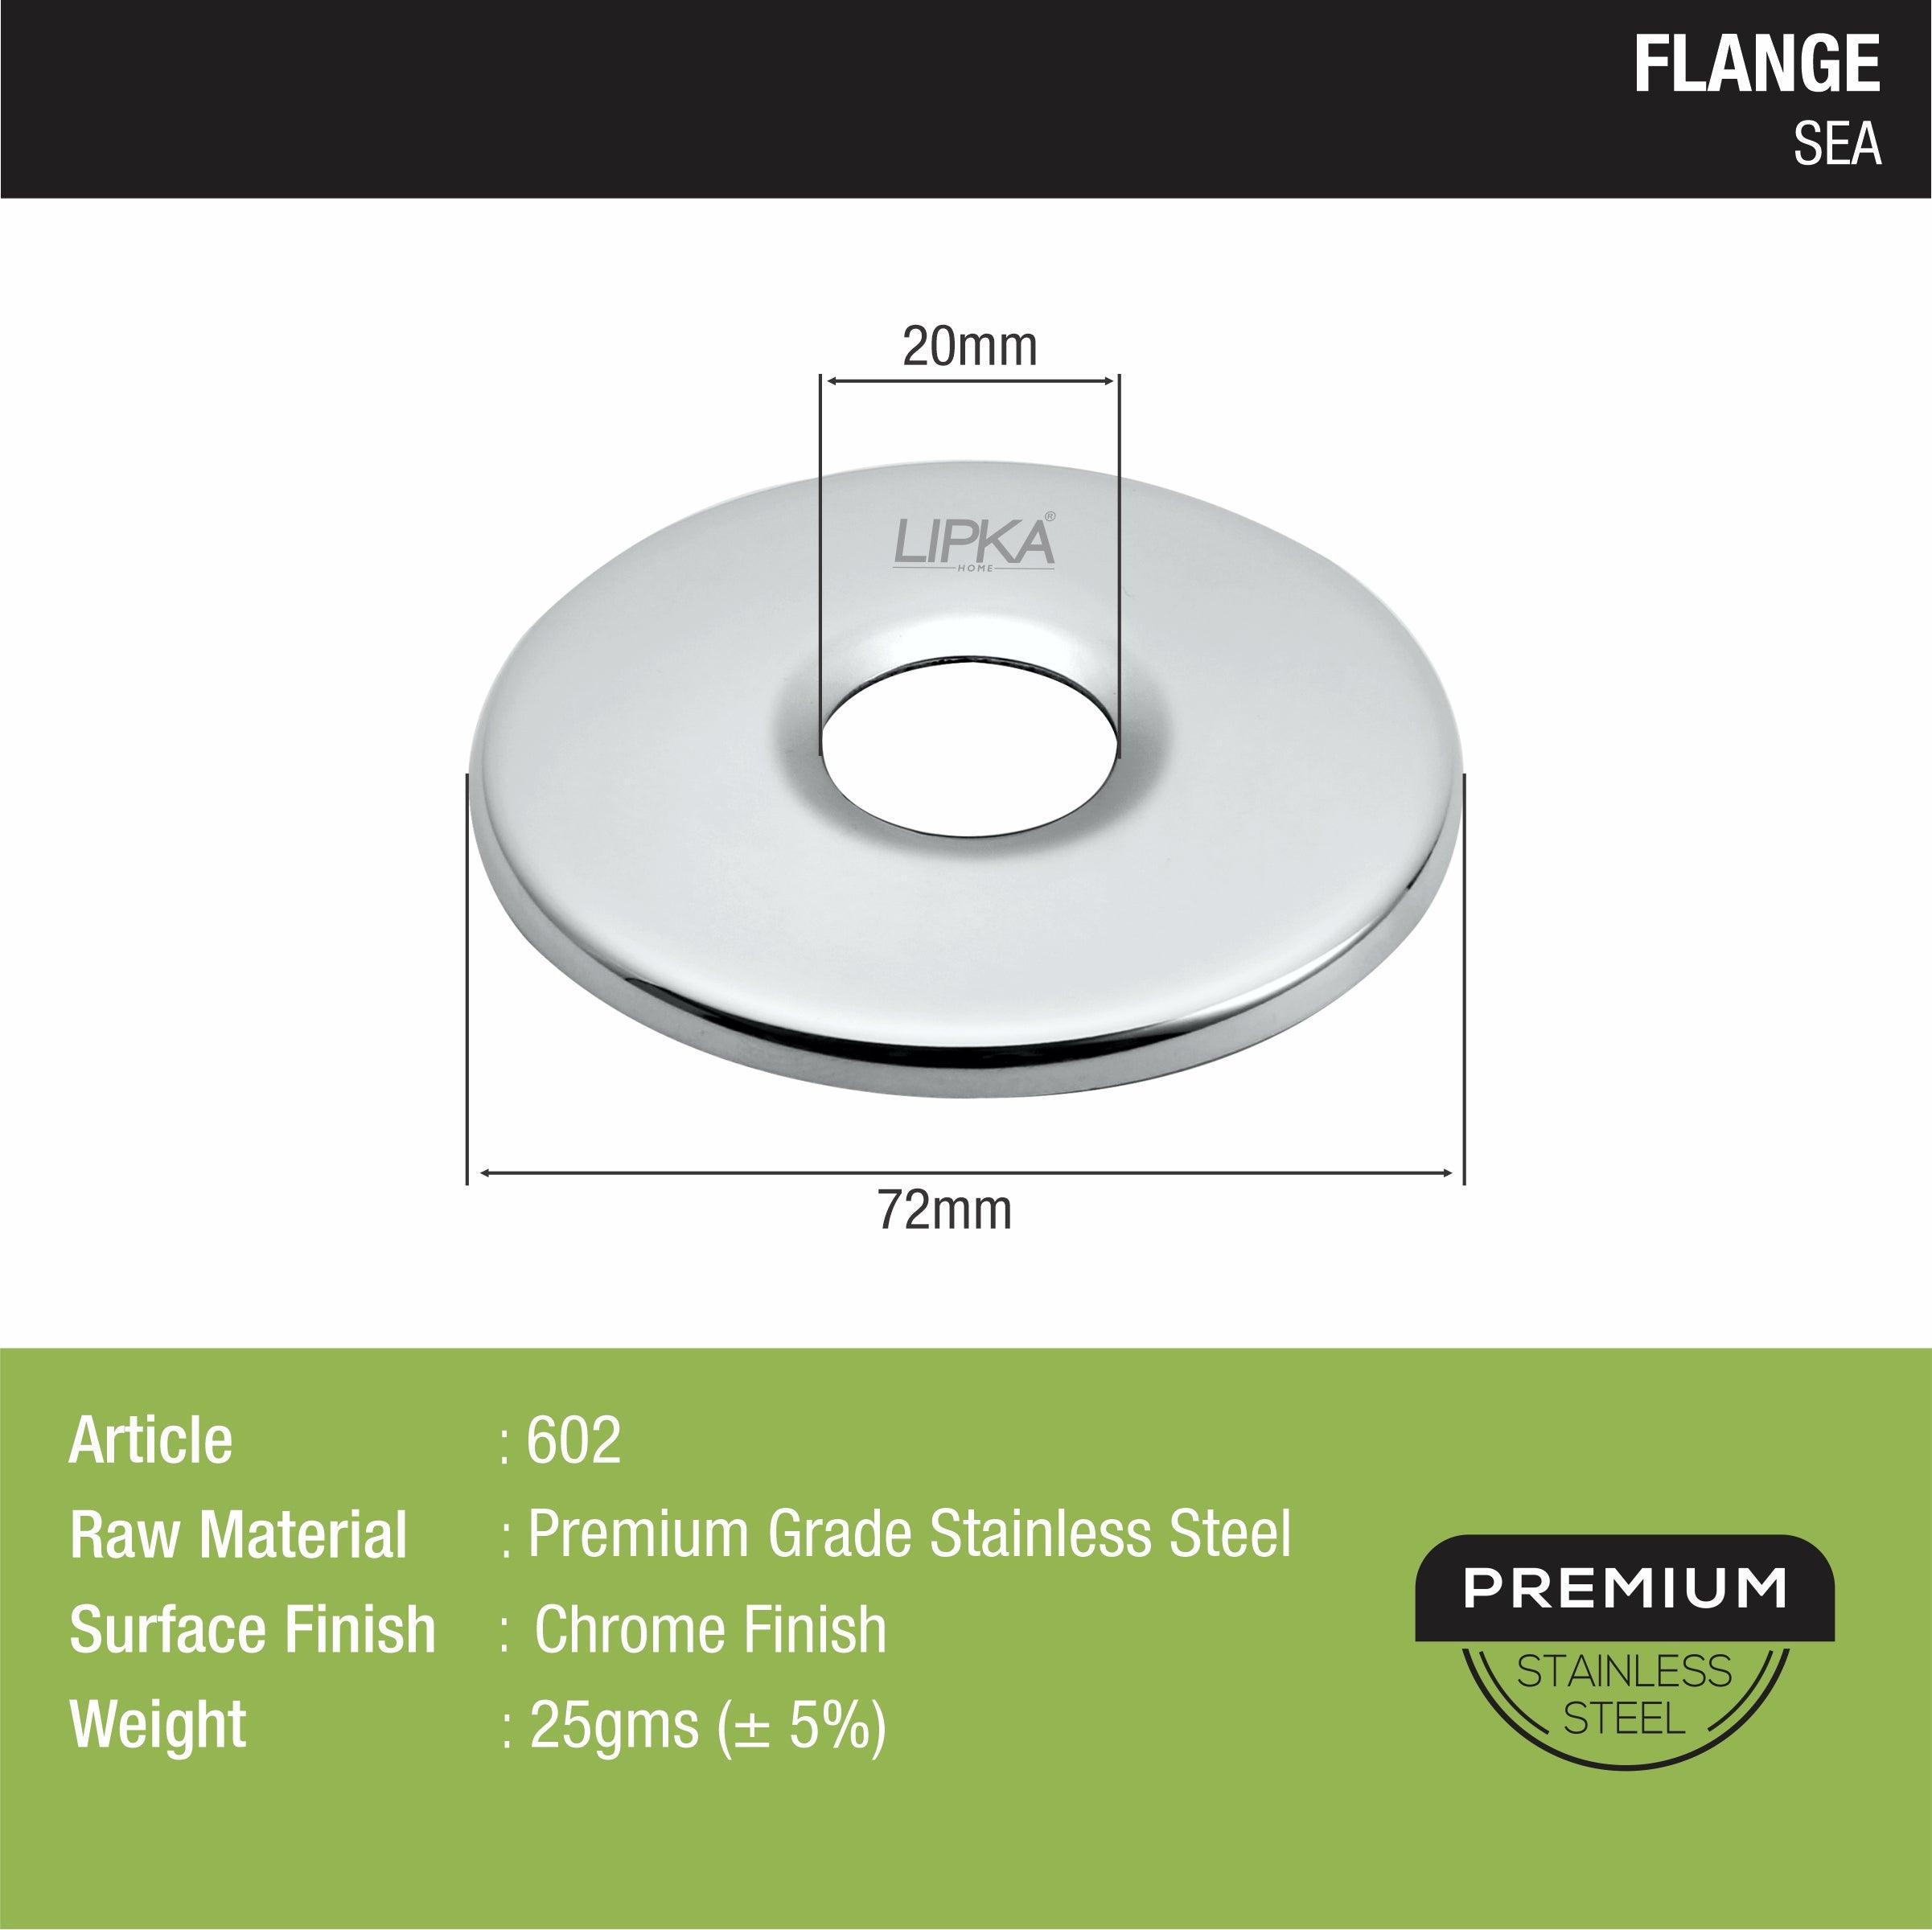 Sea Flange sizes and dimensions